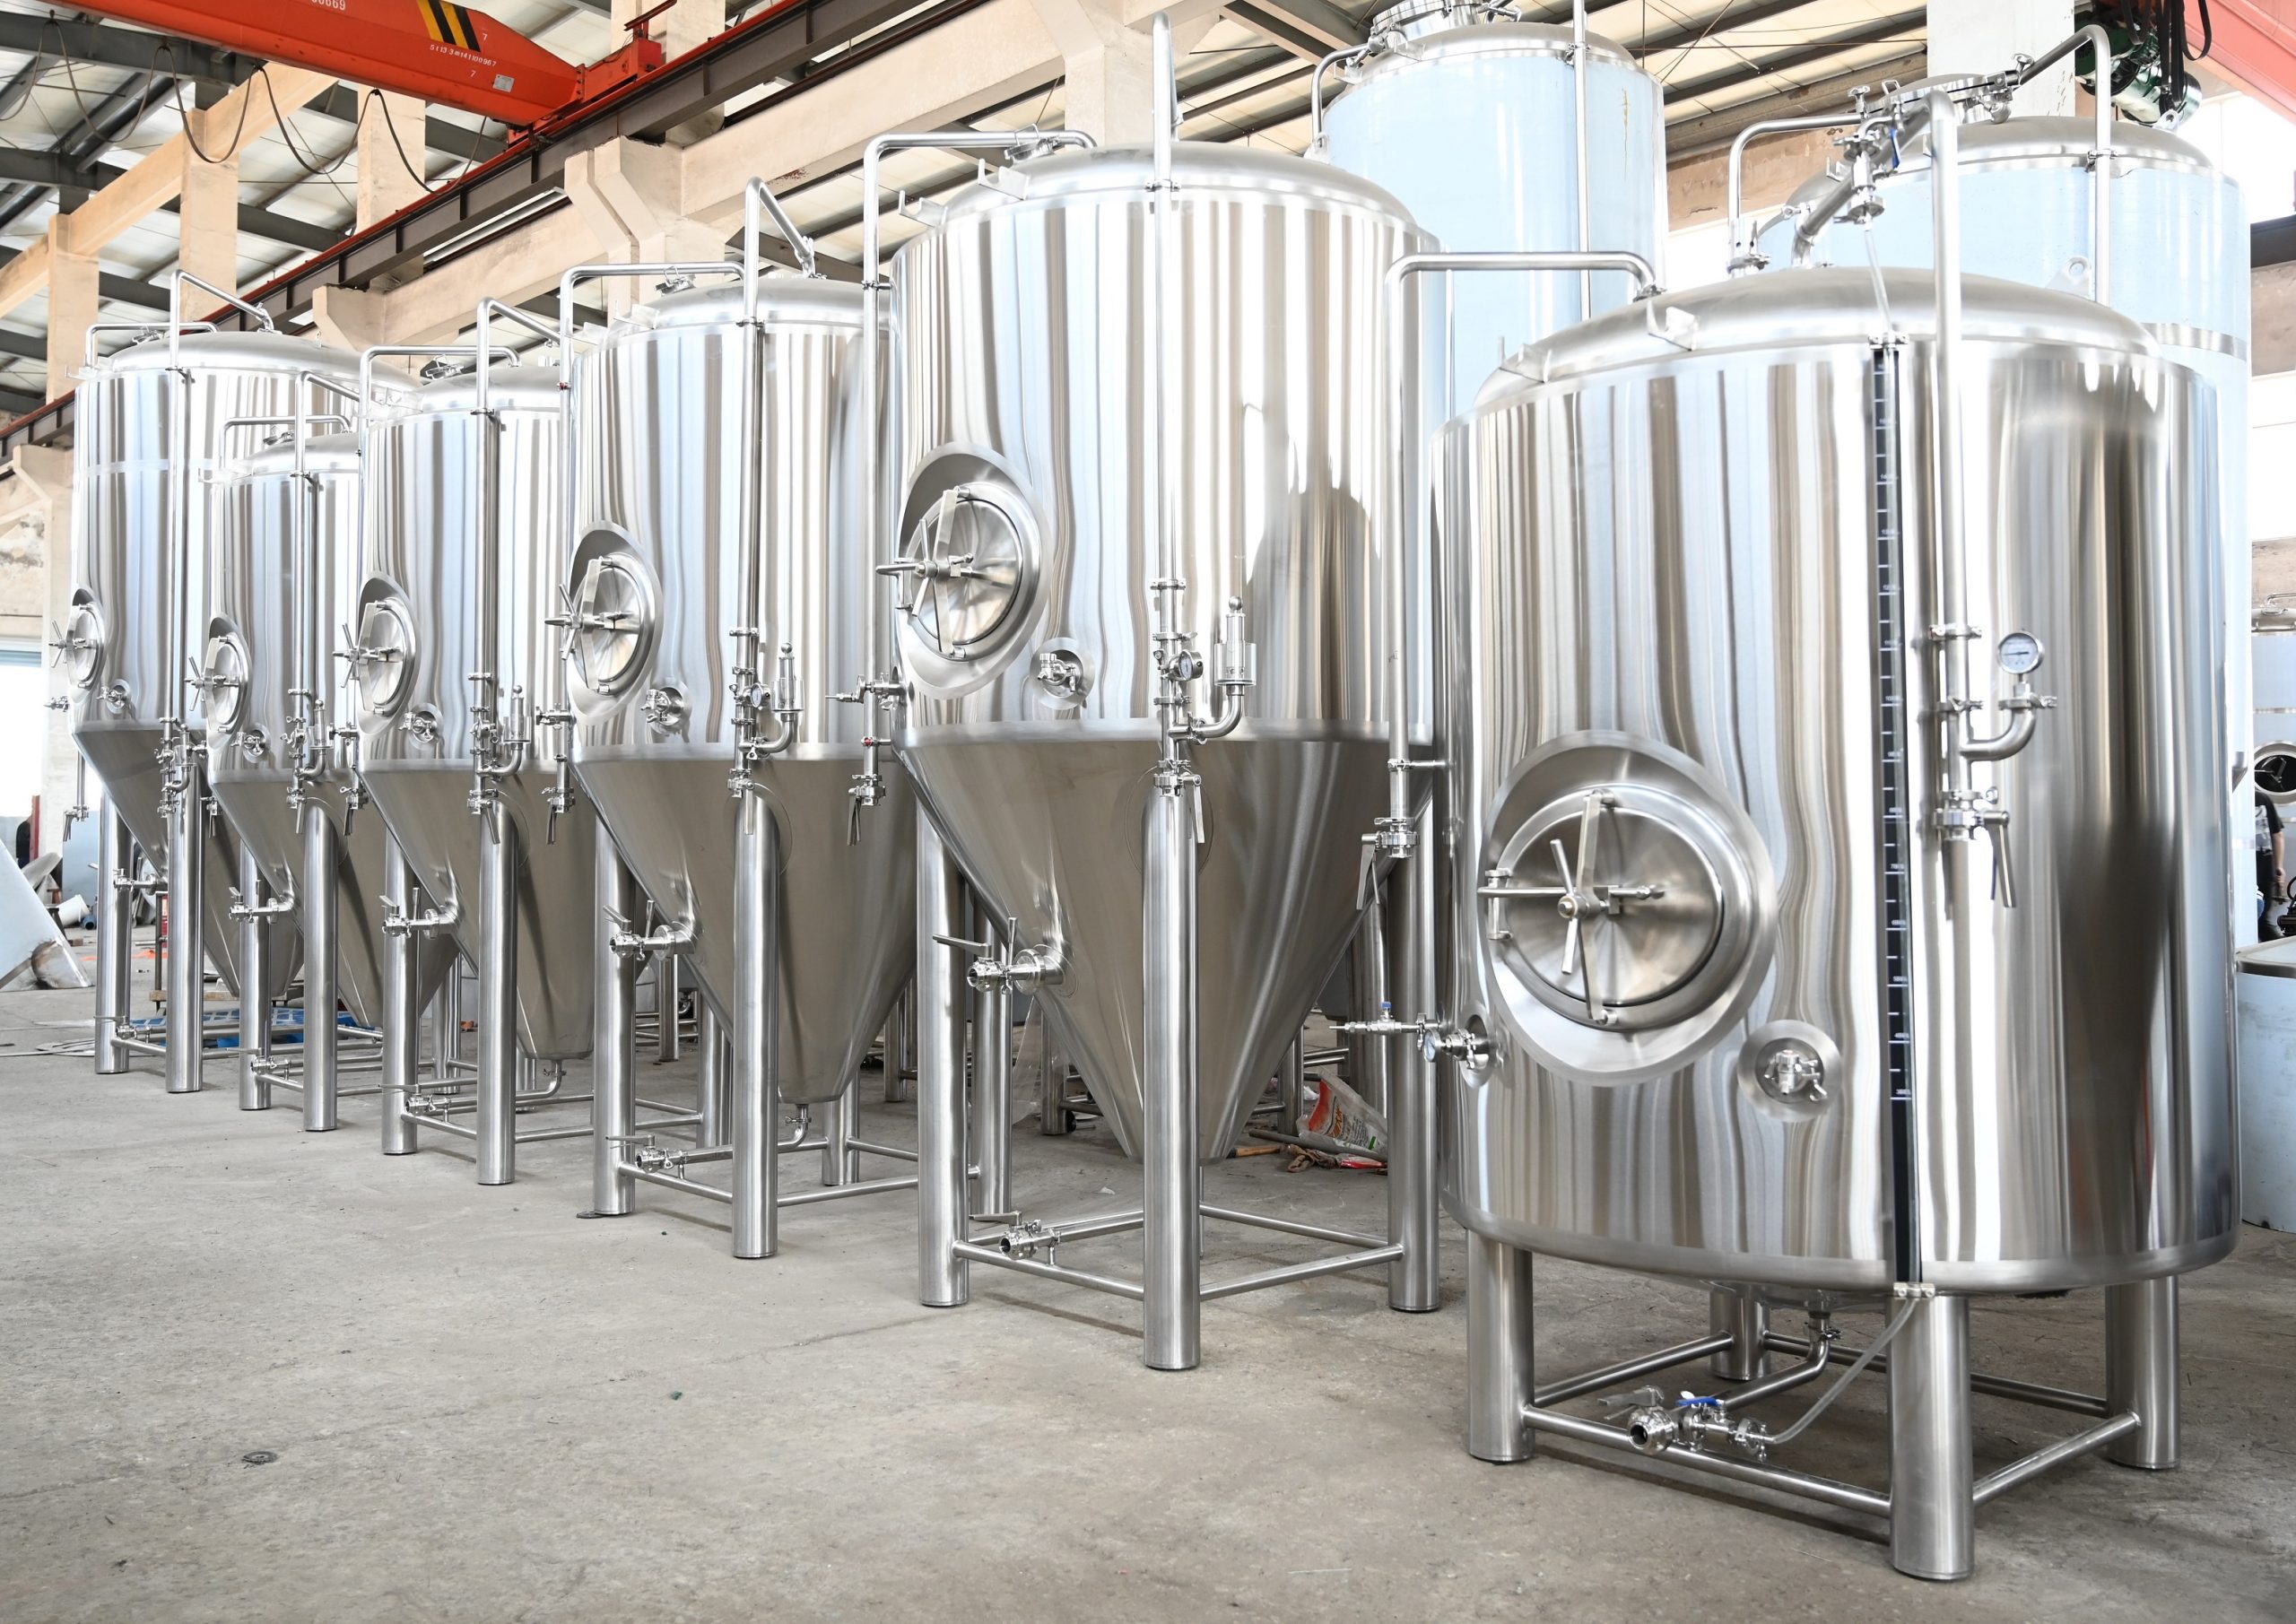 Is It Necessary For Beer Fermenters To Have The Spunding Valves?